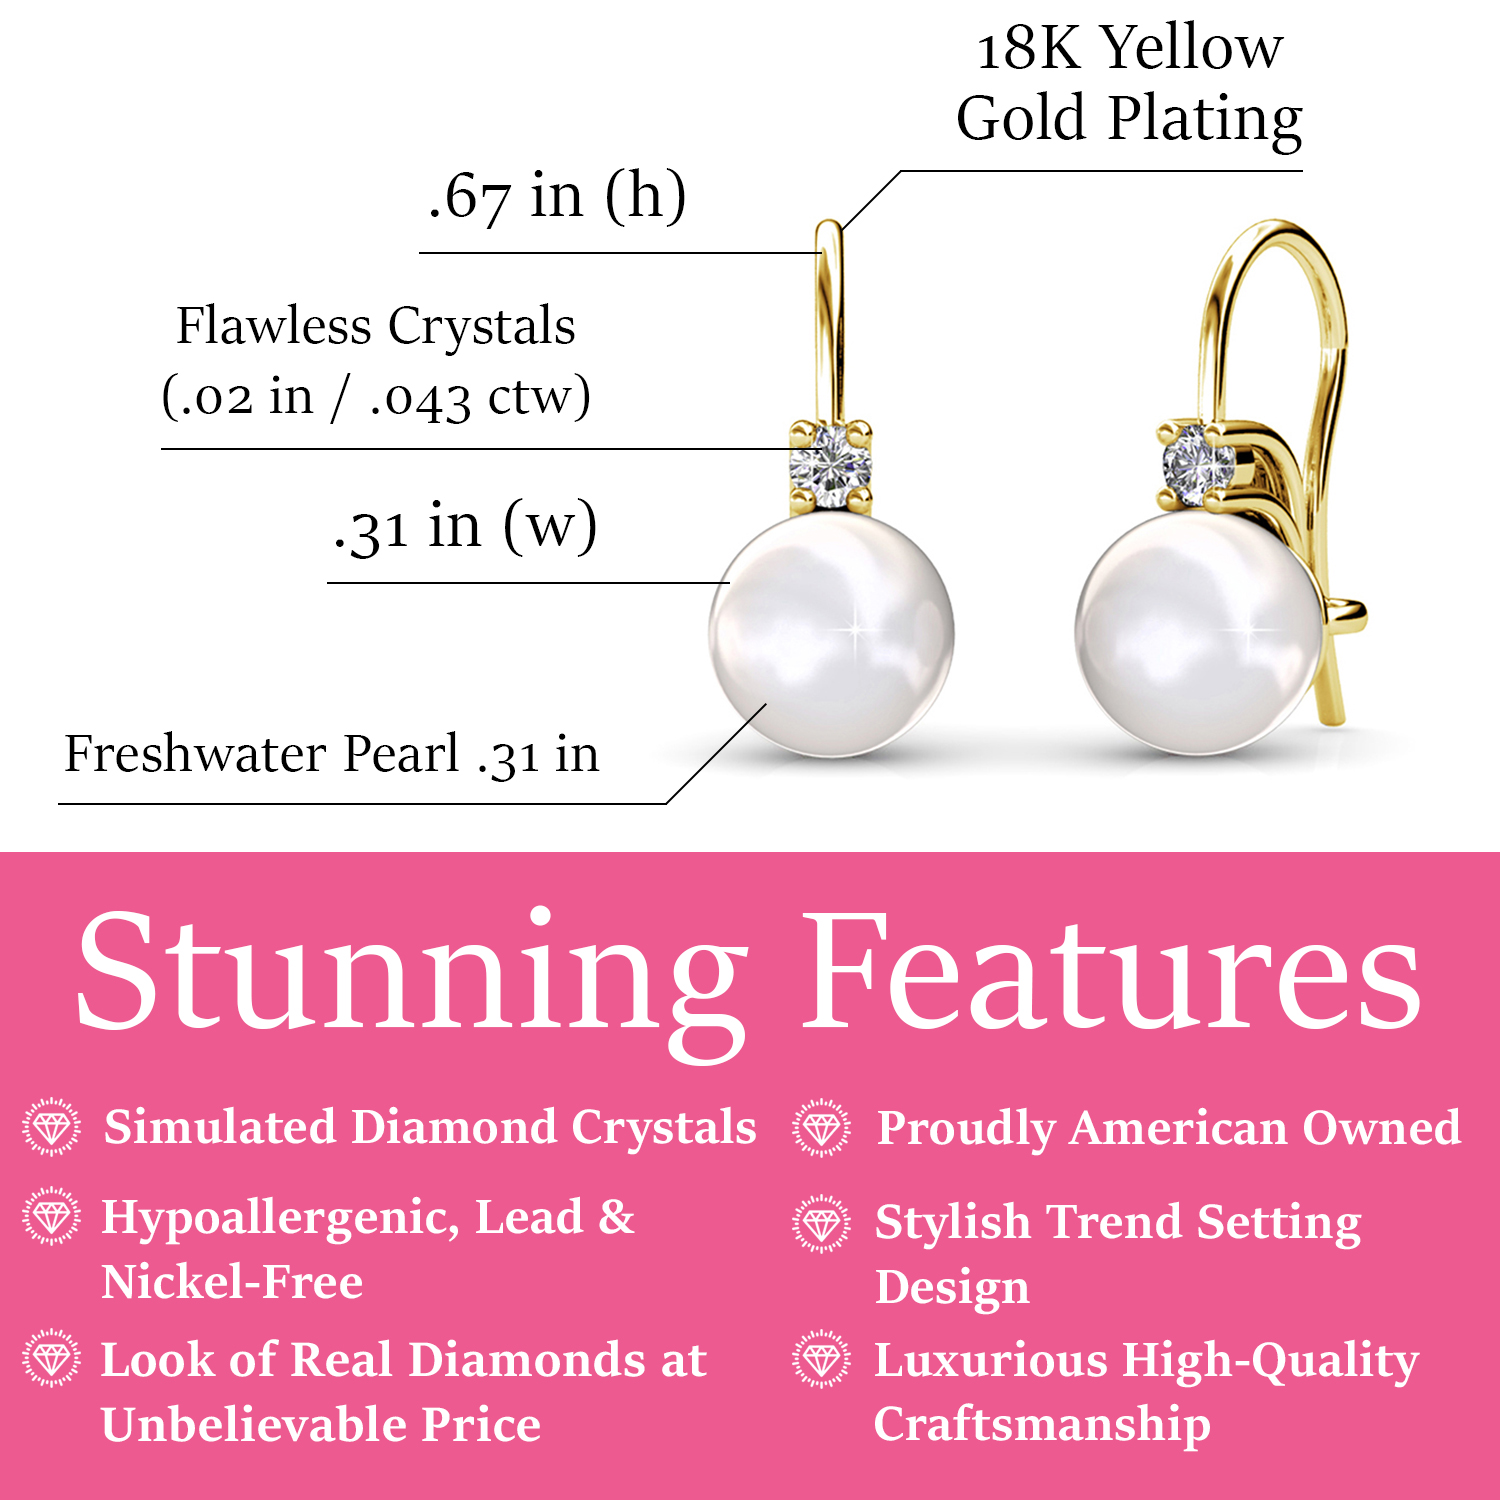 Cate & Chloe Cassie 18k Yellow Gold Plated Pearl Drop Earrings | Women's Crystal Earrings, Gift for Her - image 3 of 10